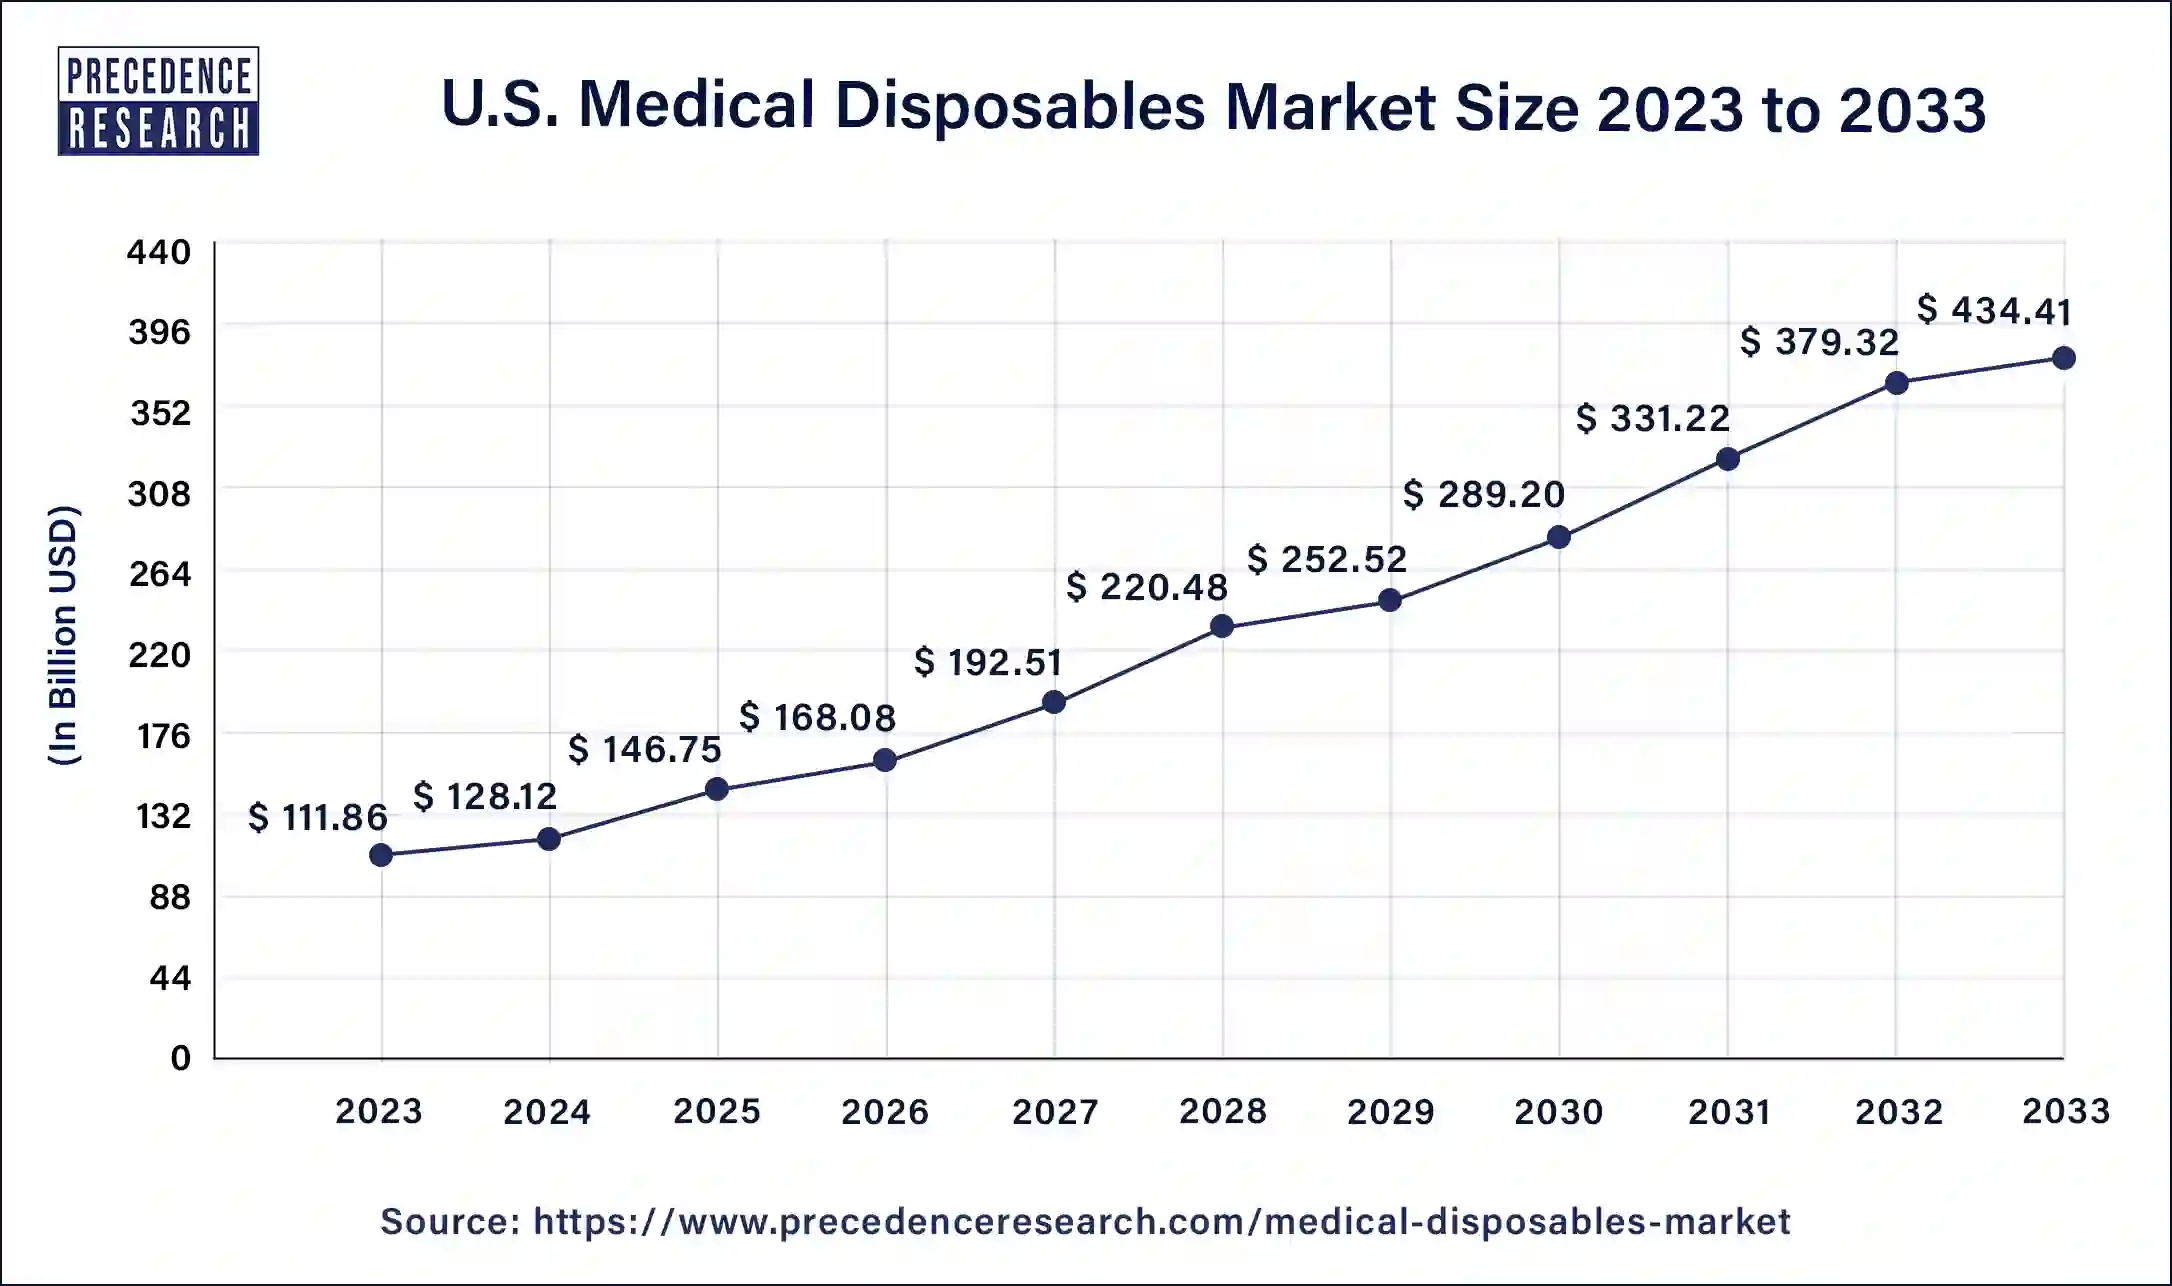 U.S. Medical Disposables Market Size 2024 to 2033